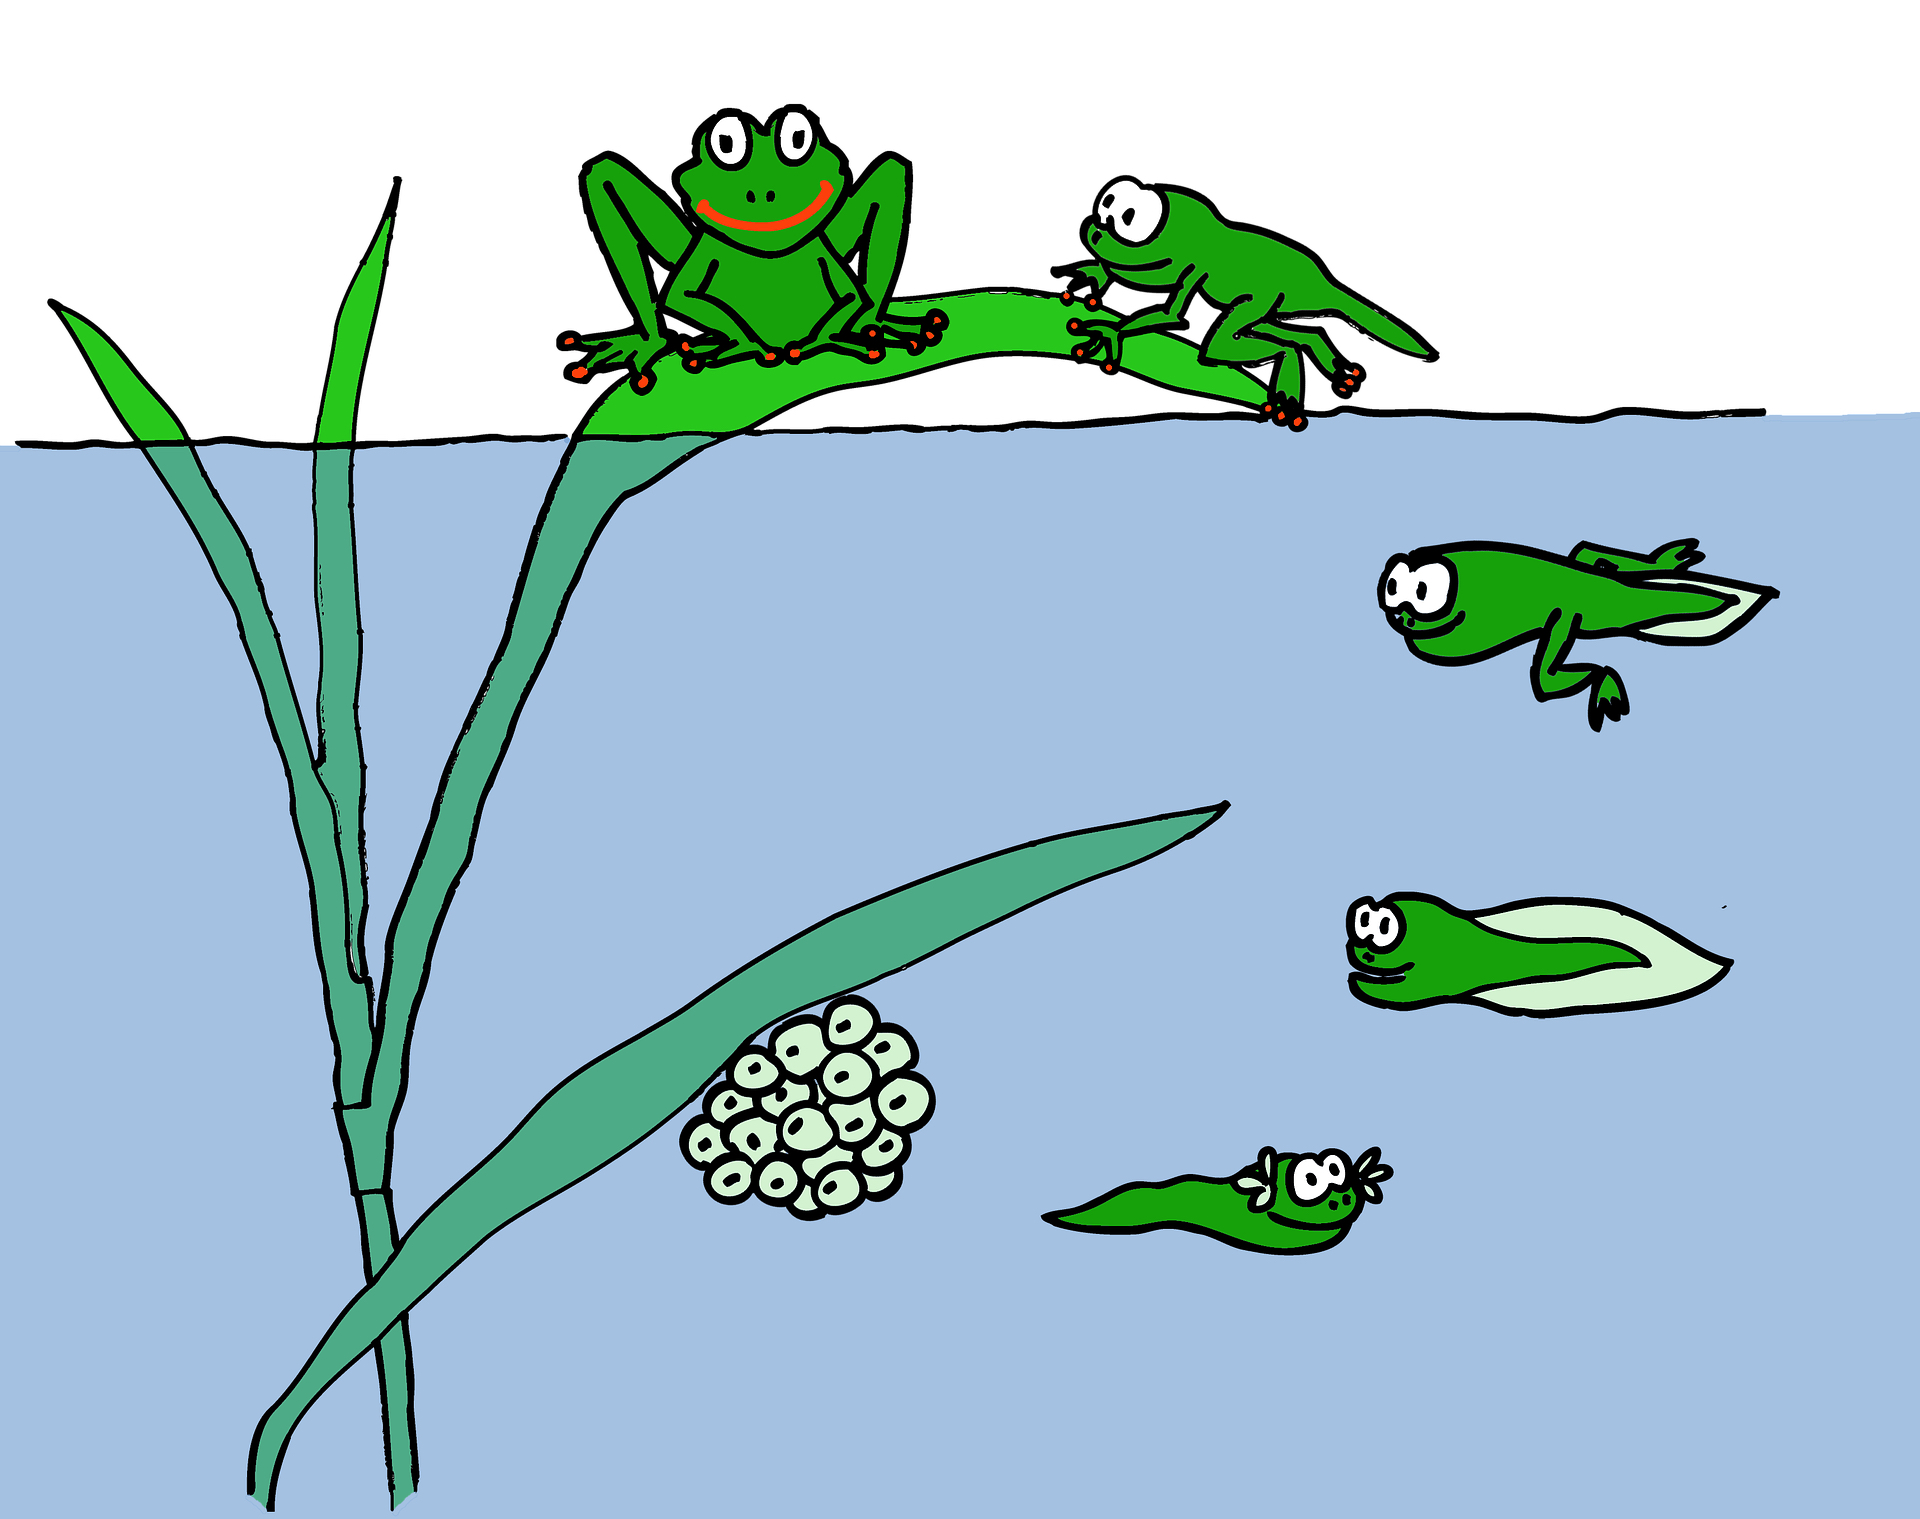 1A frog life cycle FIXED-758072_1920.jpg